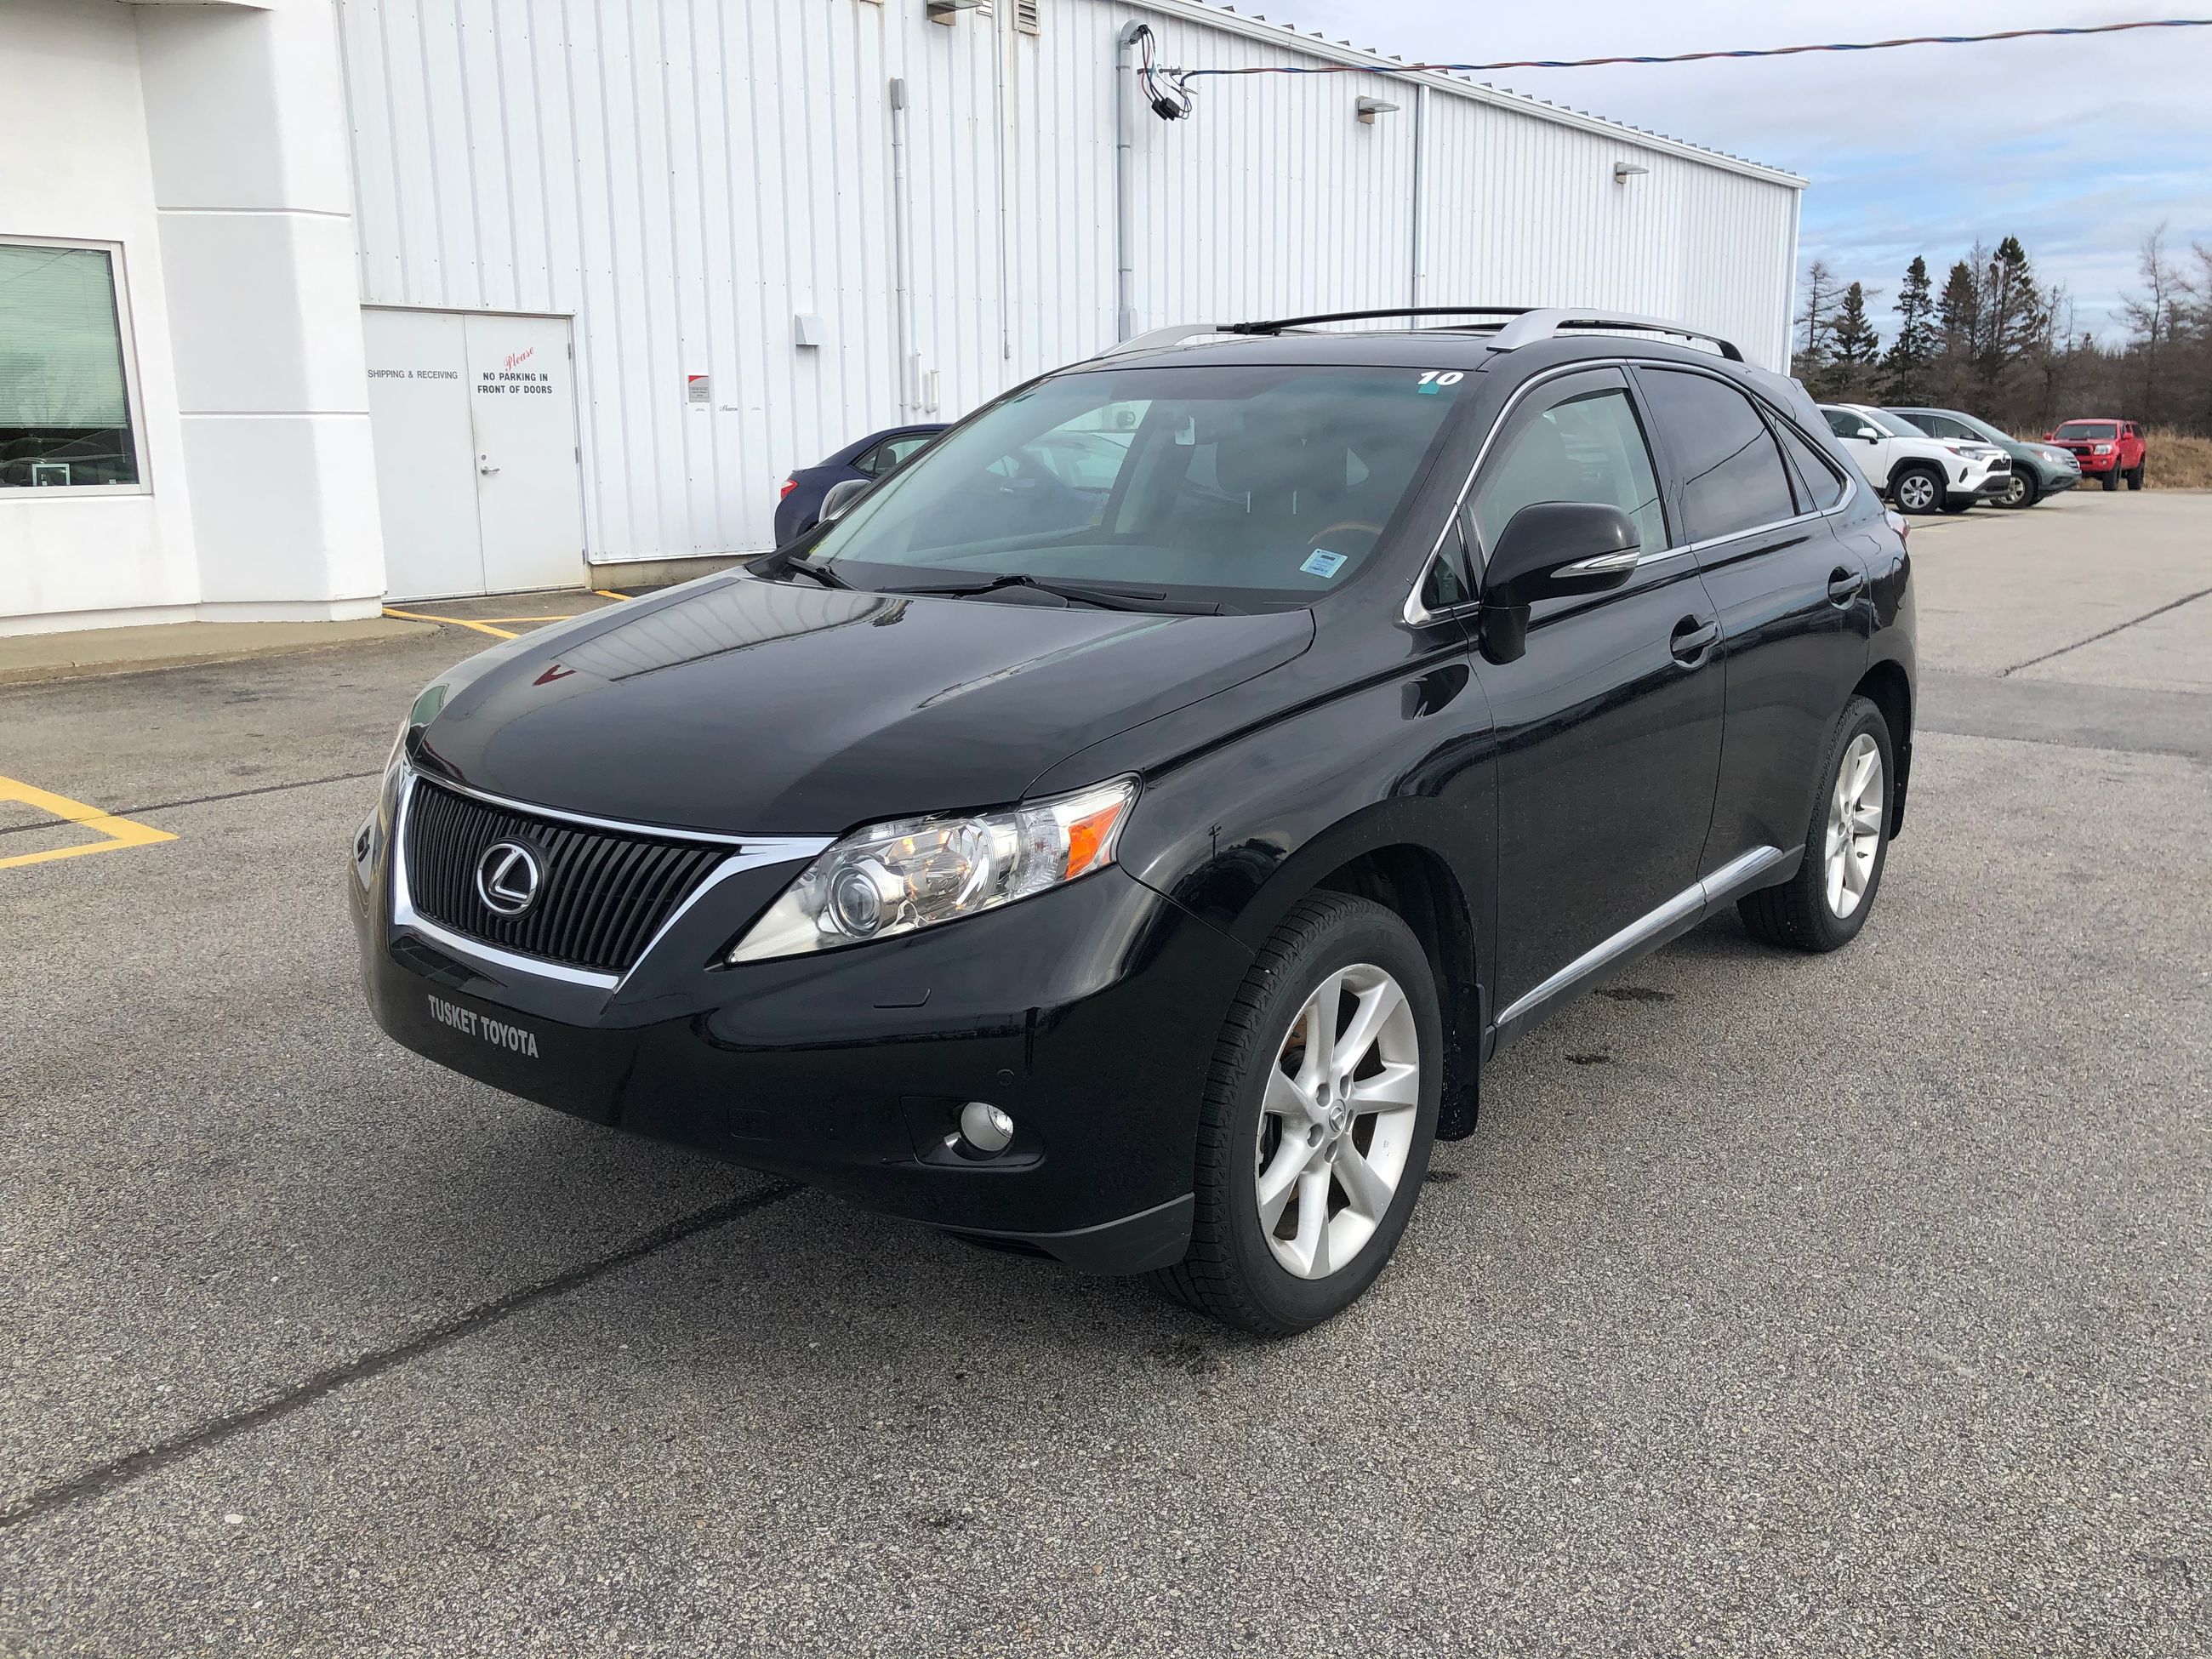 Used 2010 Lexus RX 350 V6 AWD in Yarmouth - Used inventory - Tusket ...